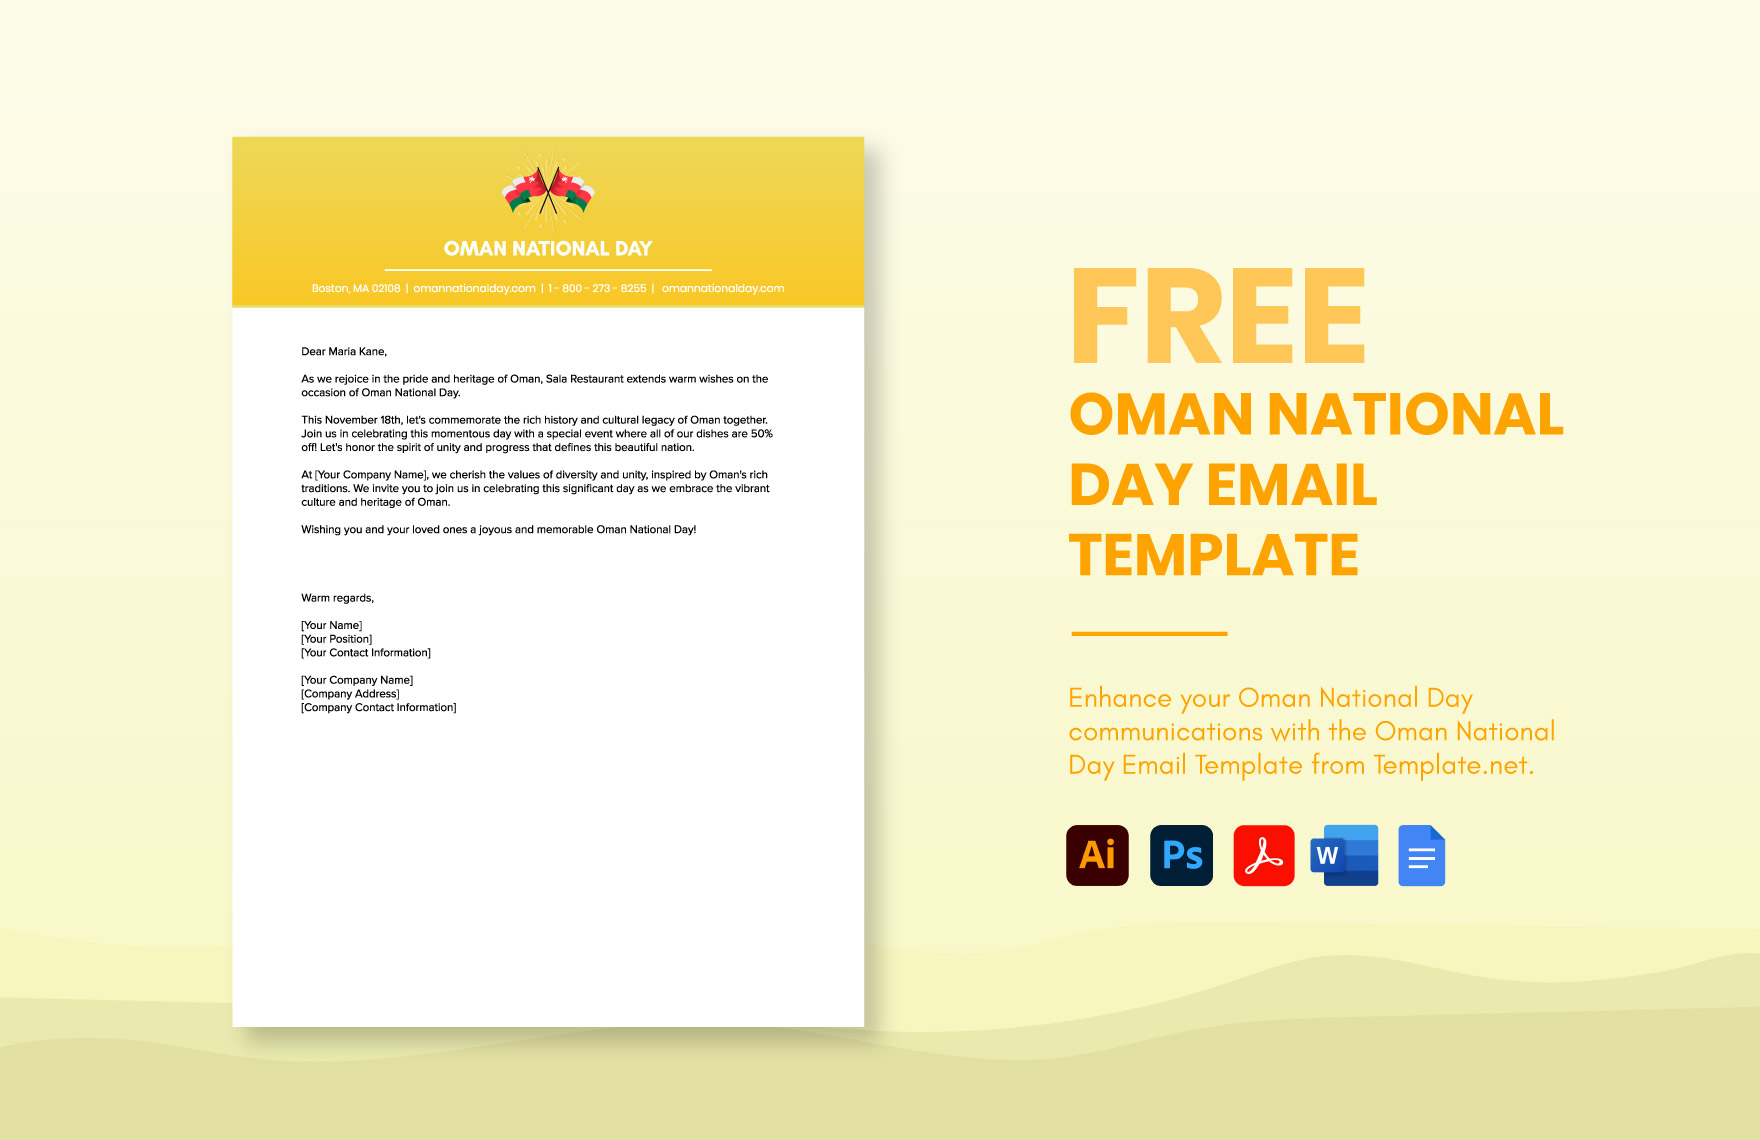 Free Oman National Day Email Template in Word, Google Docs, PDF, Illustrator, PSD